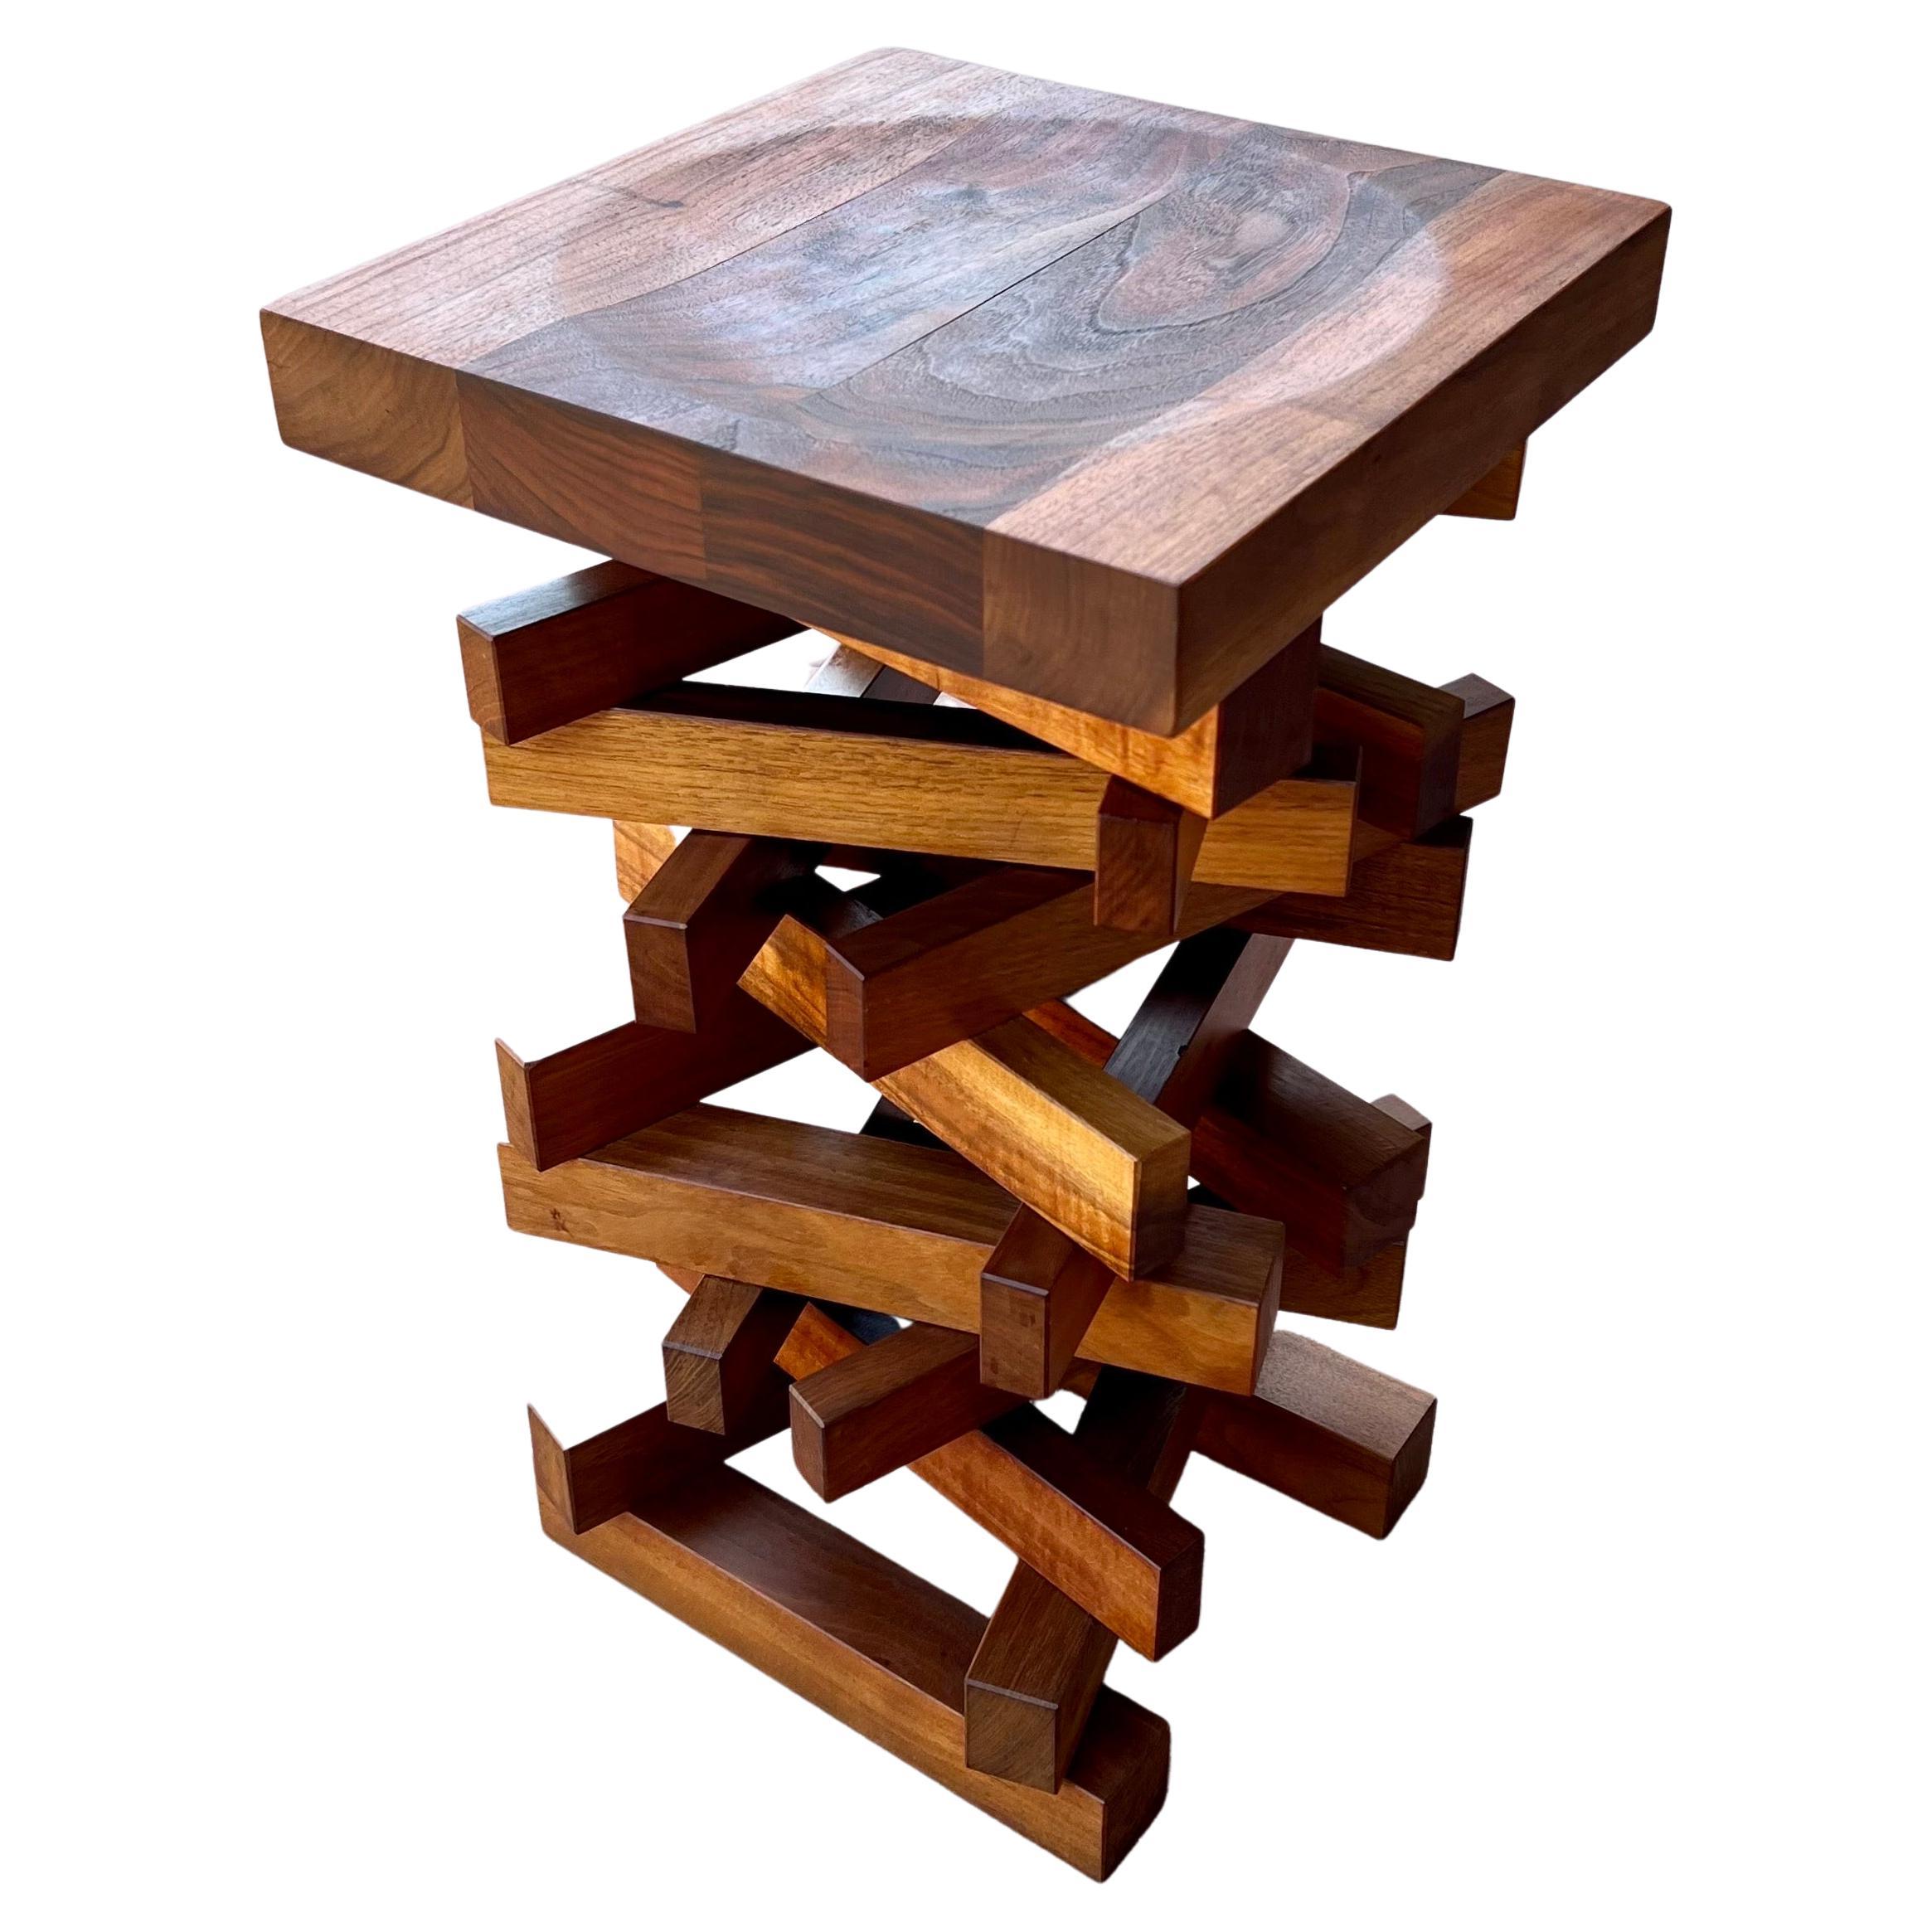 The beautiful art piece can be used as a pedestal, cocktail table, or stool made in solid walnut and handcrafted in Italy circa 2006, we have refinished and oiled the piece looks amazing beautiful patina designed by Terry Dwan California artist,